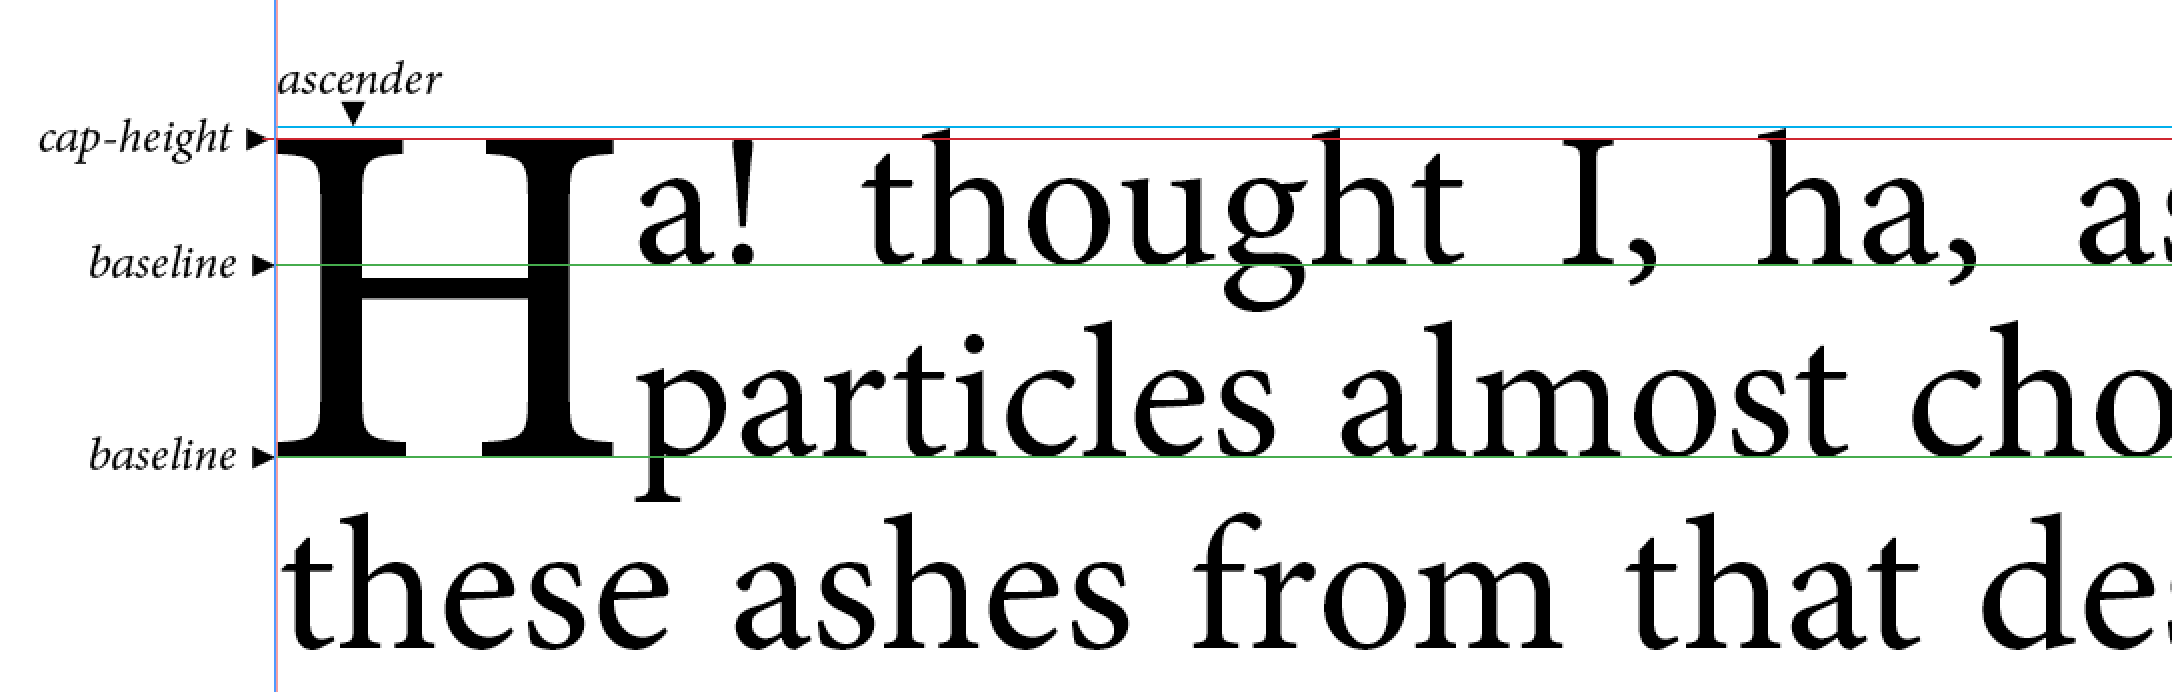 How a two-line drop cap aligns with its adjoining paragraph